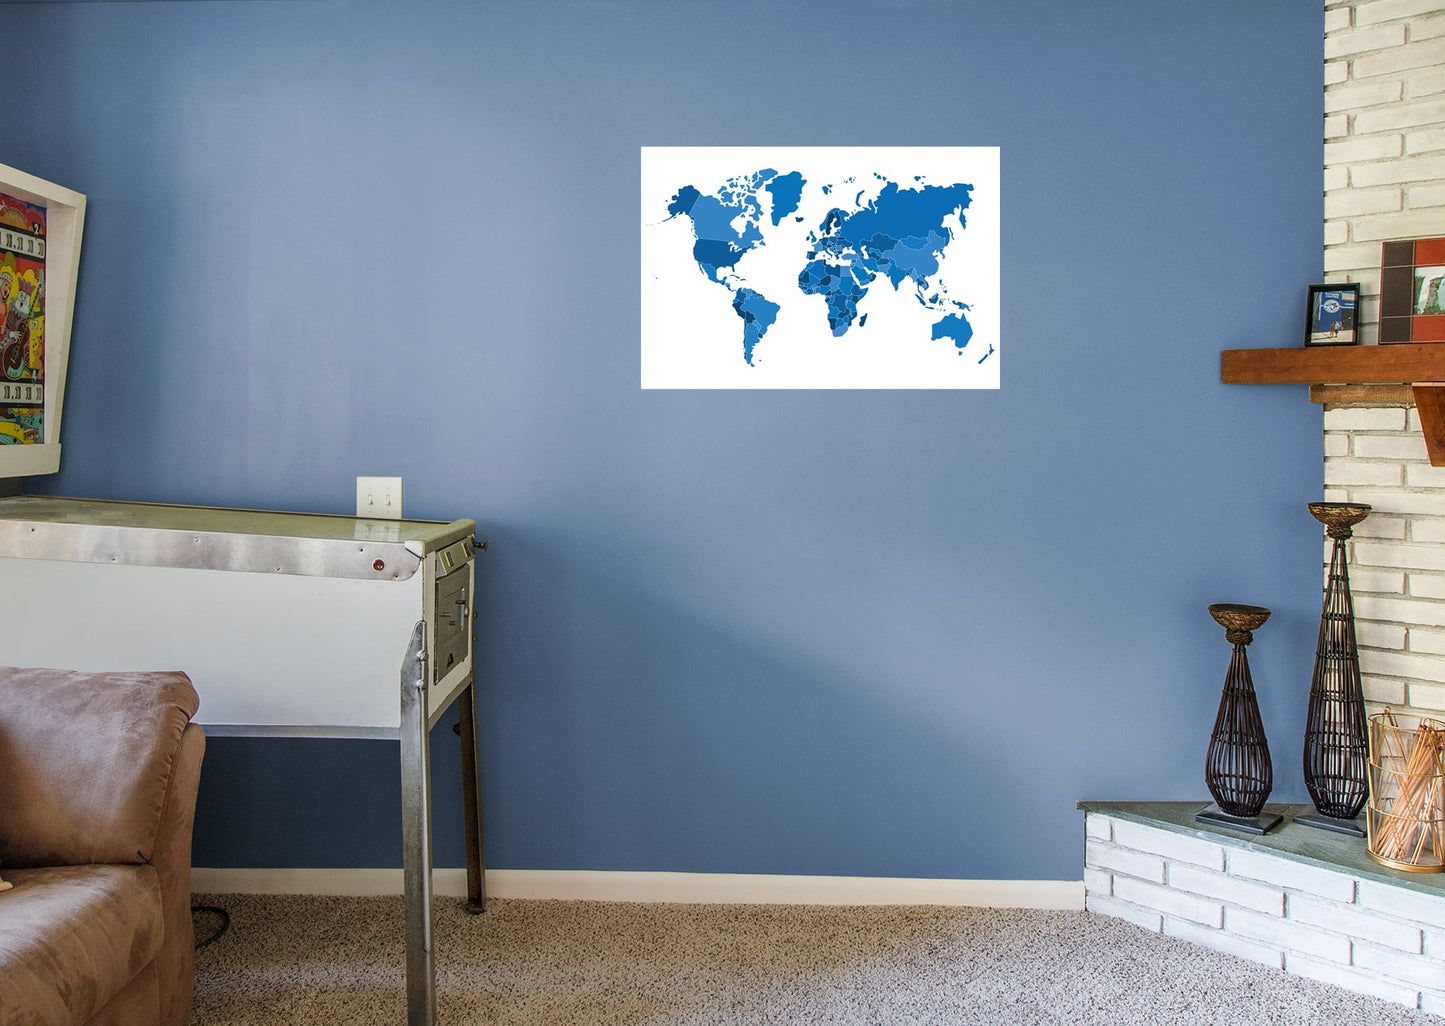 World Maps:  Stylized World Map Mural        -   Removable Wall   Adhesive Decal